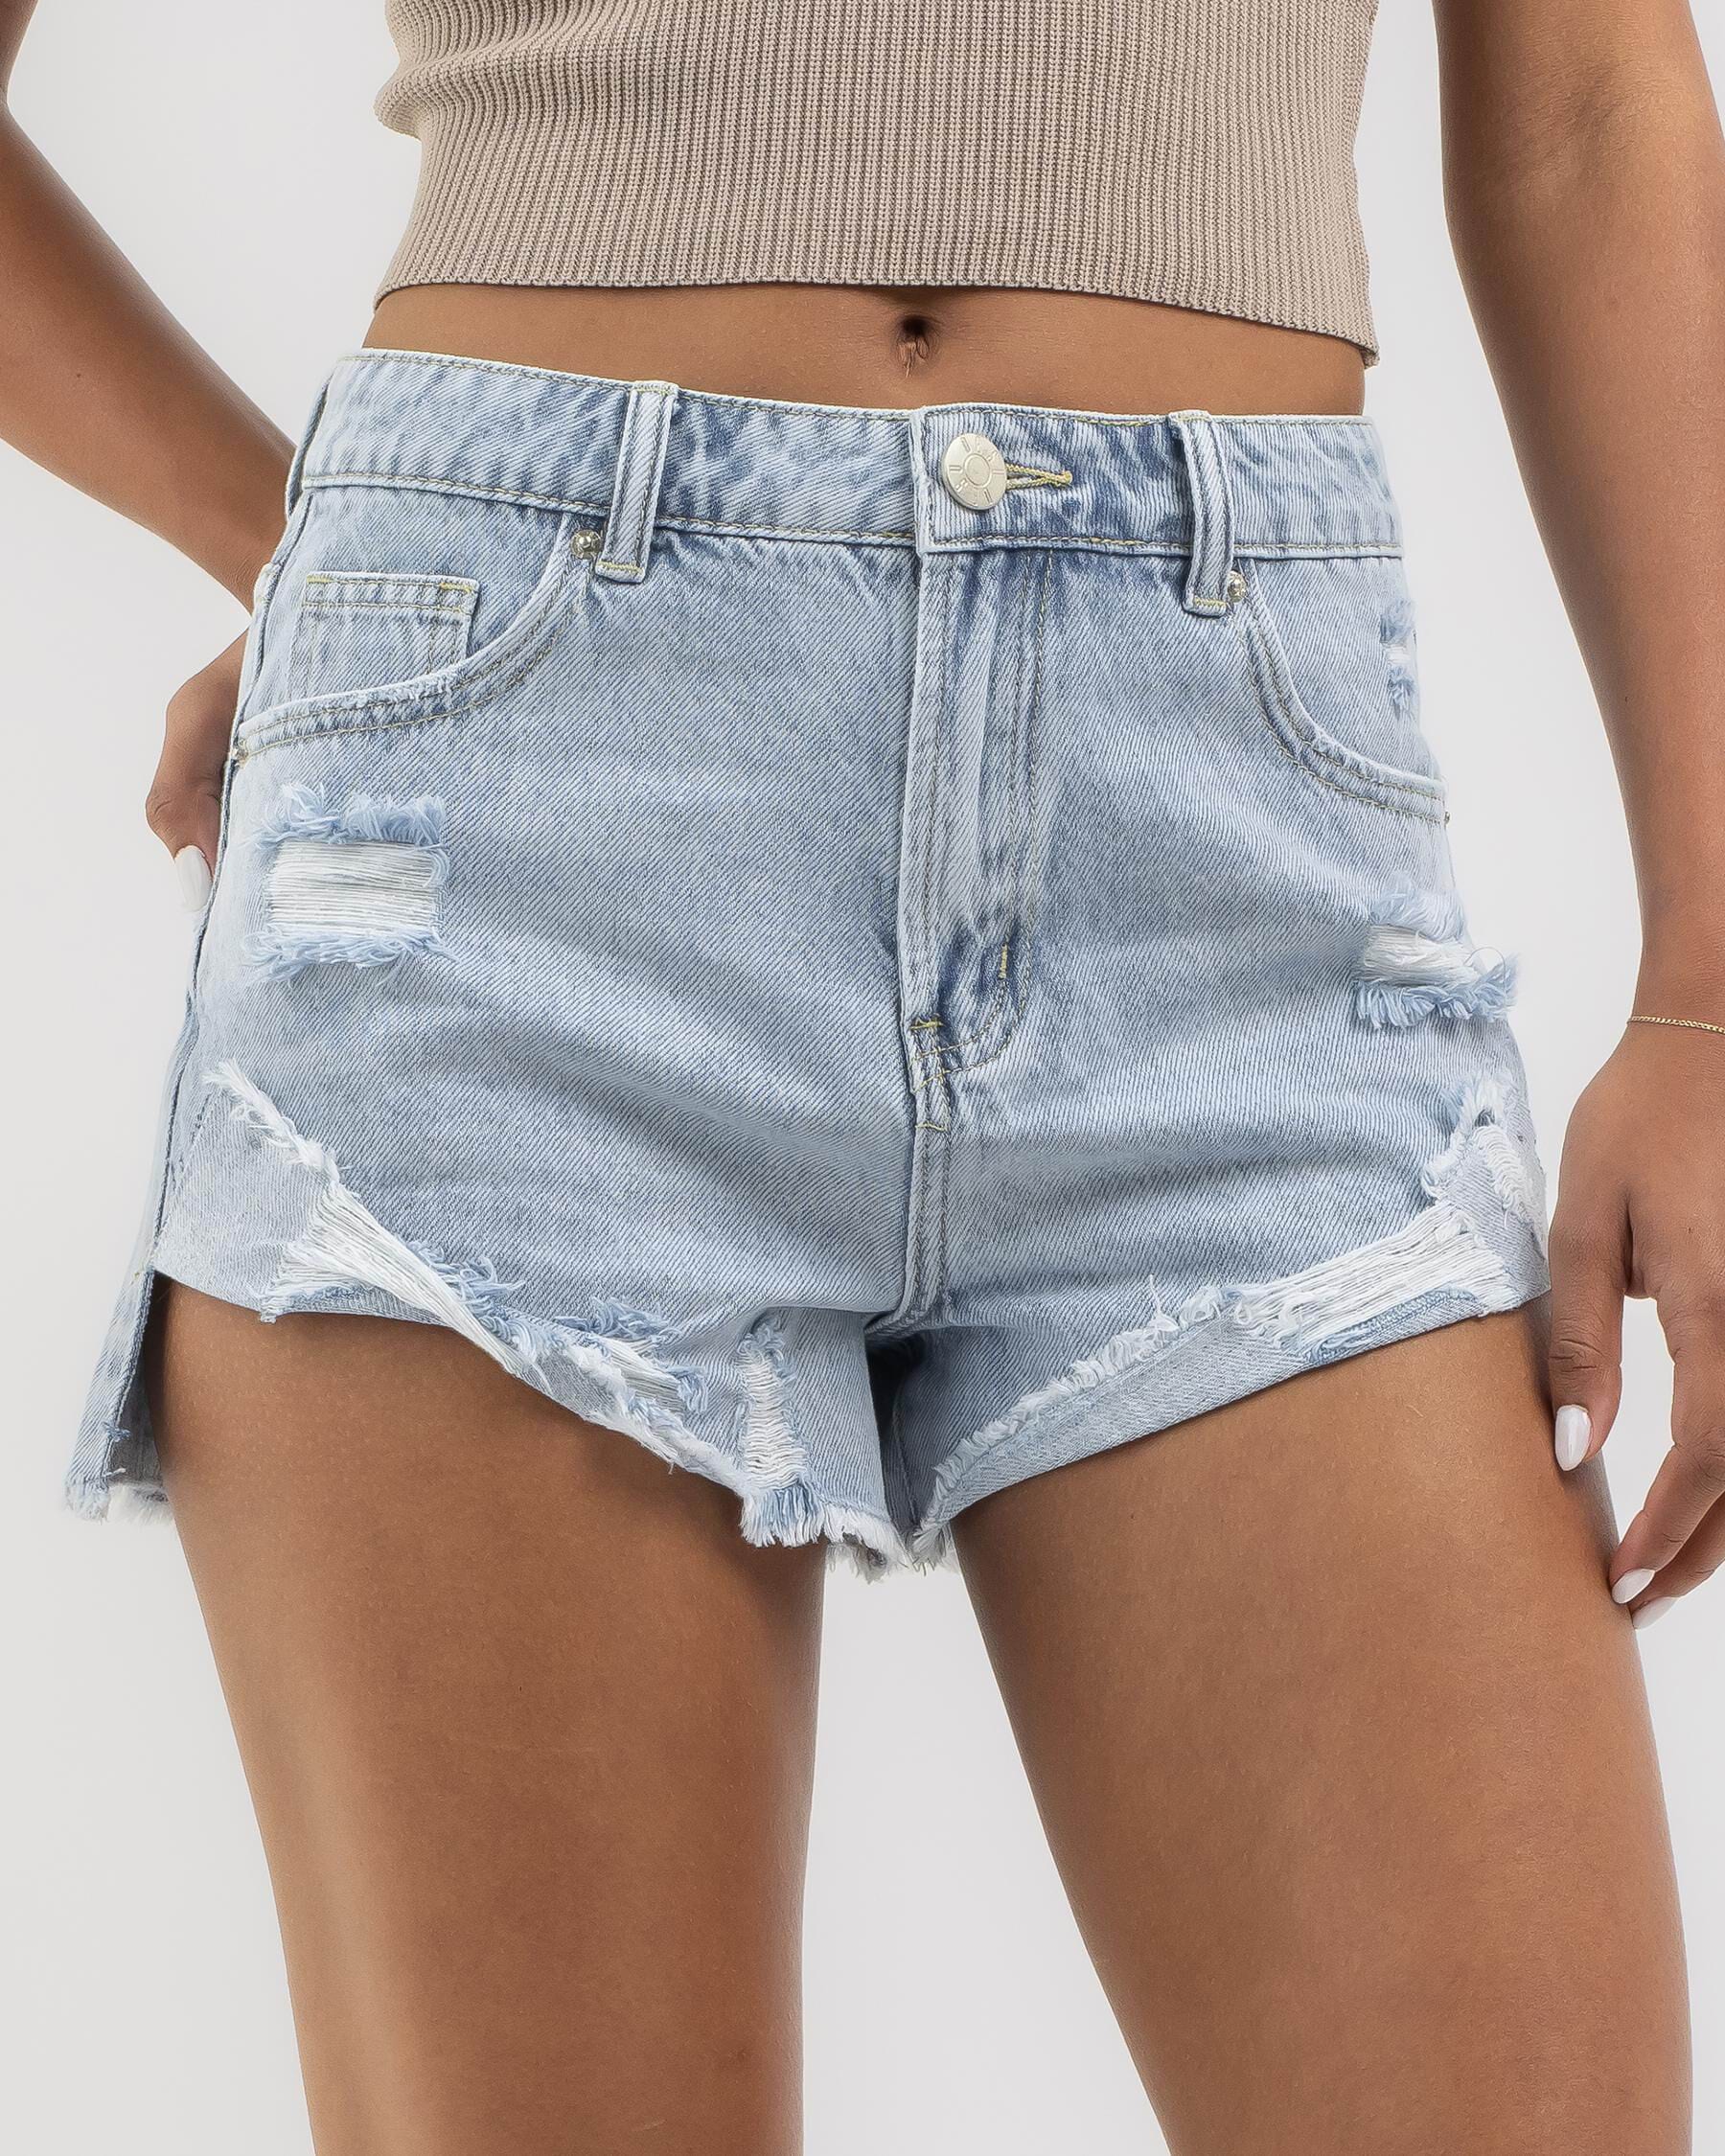 Ripped Jean Shorts for Women | PacSun